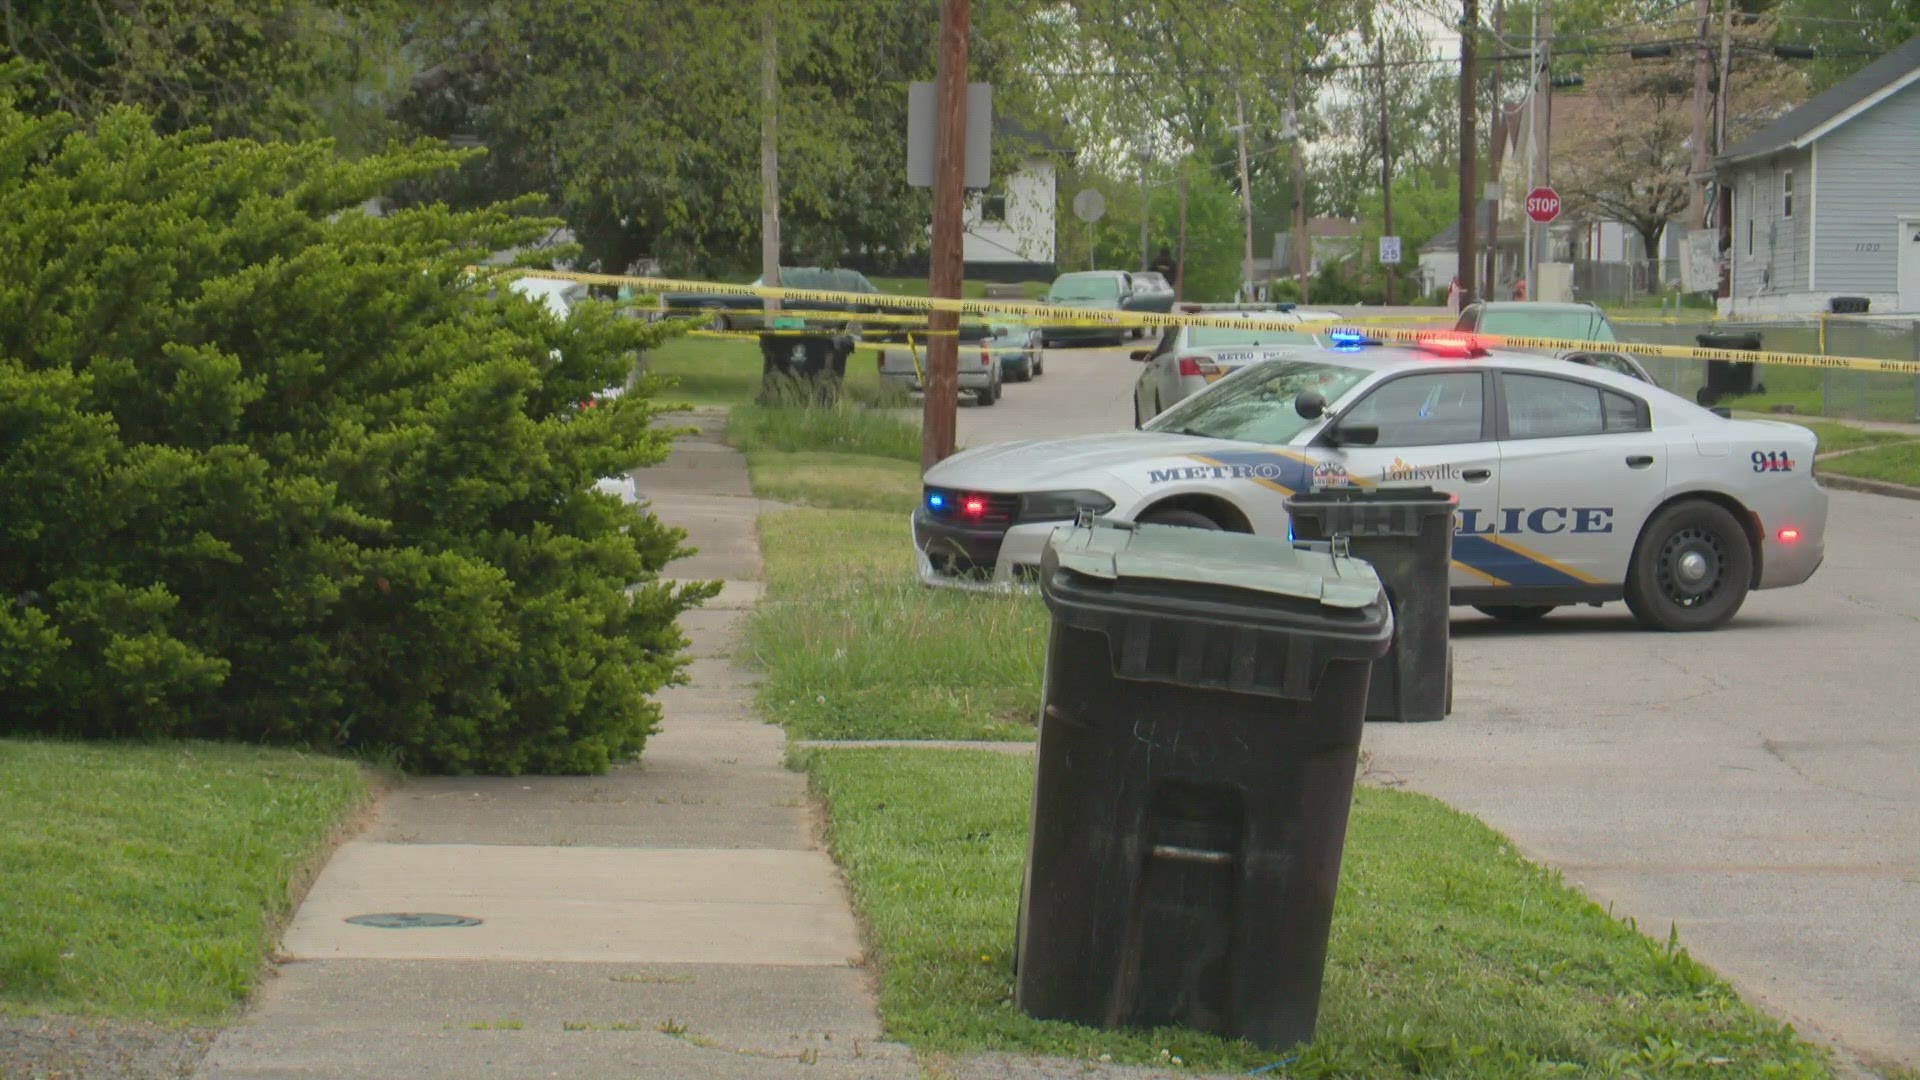 According to Louisville Metro Police, officers tried to stop a vehicle in the 4300 block of Sunset Avenue around 5:30 p.m.